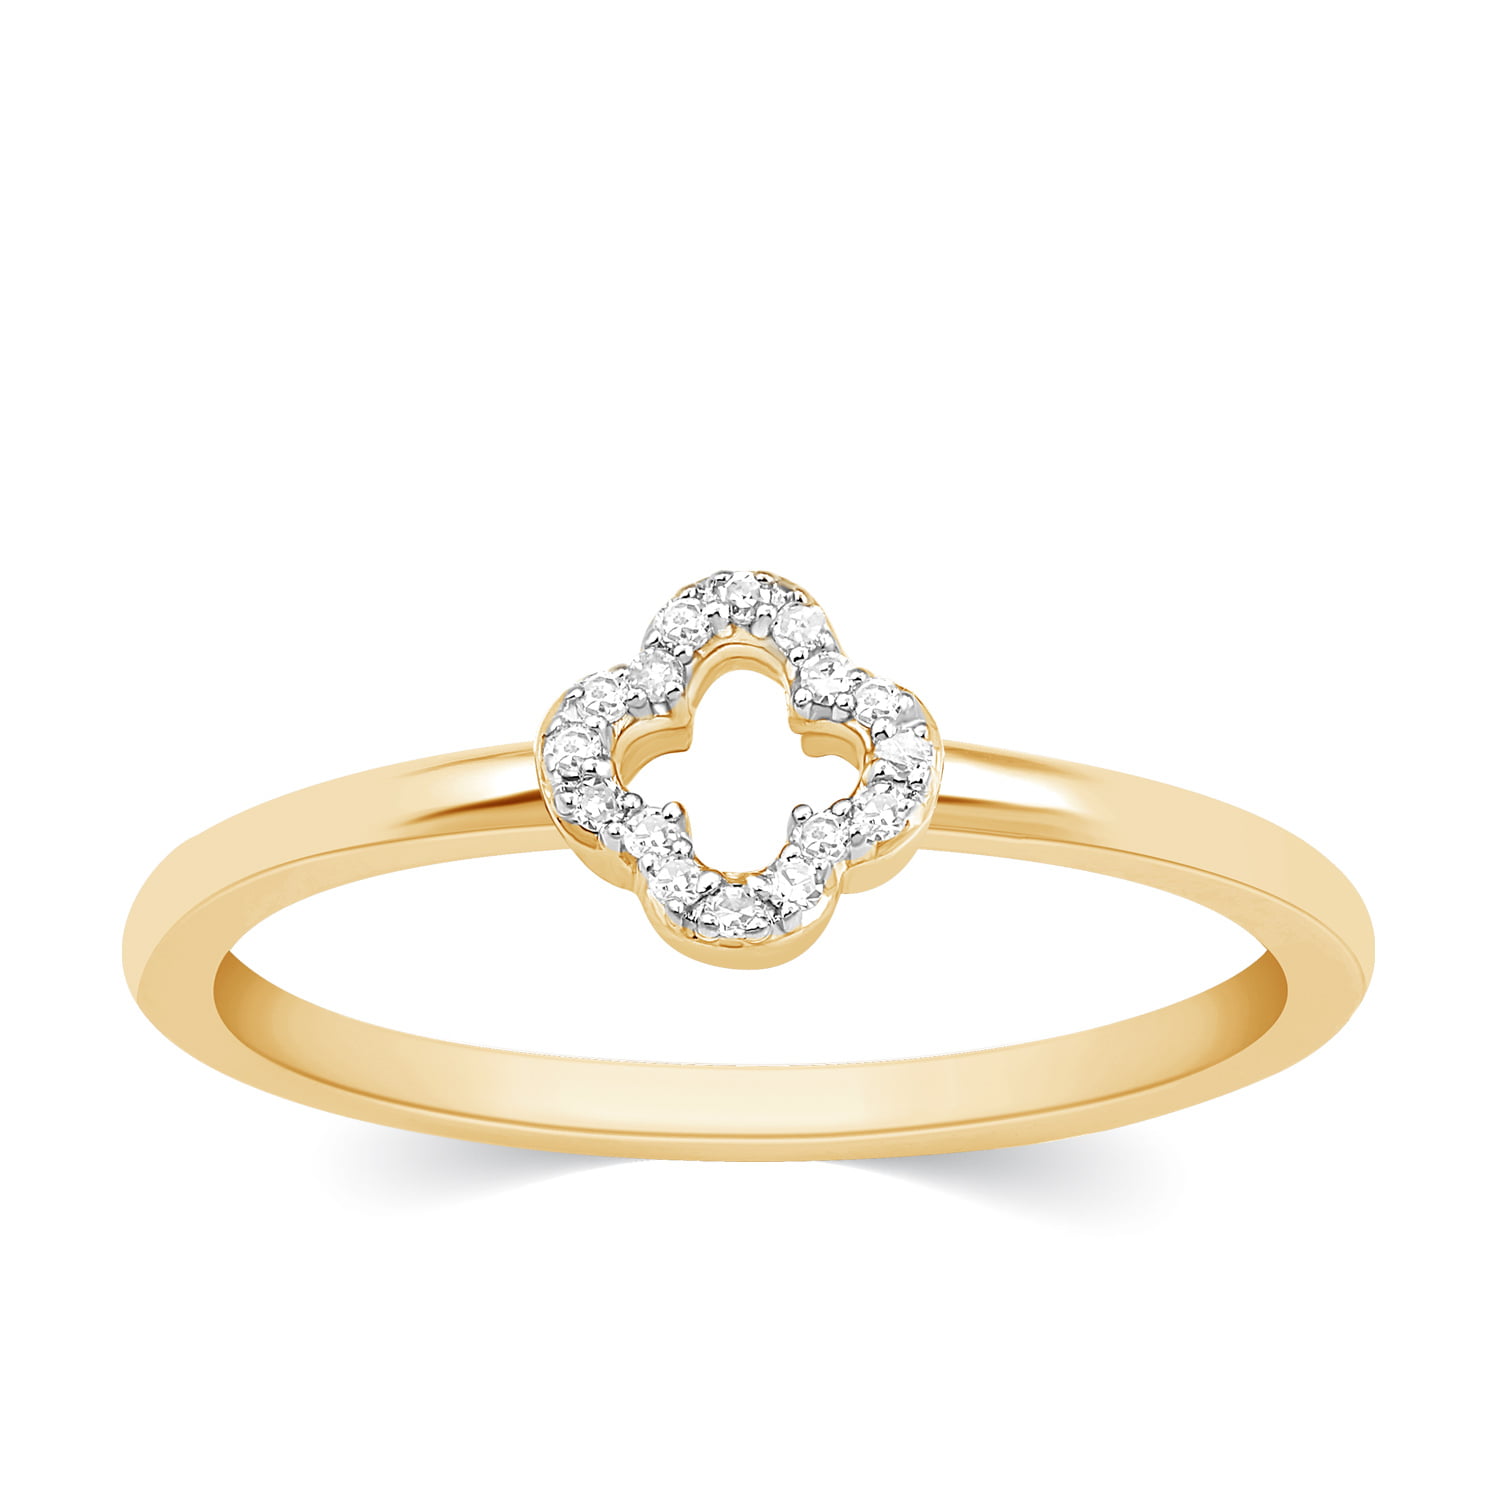 0.06 Carat Real Diamond Engagement Ring With 14k Yellow Gold For Women 